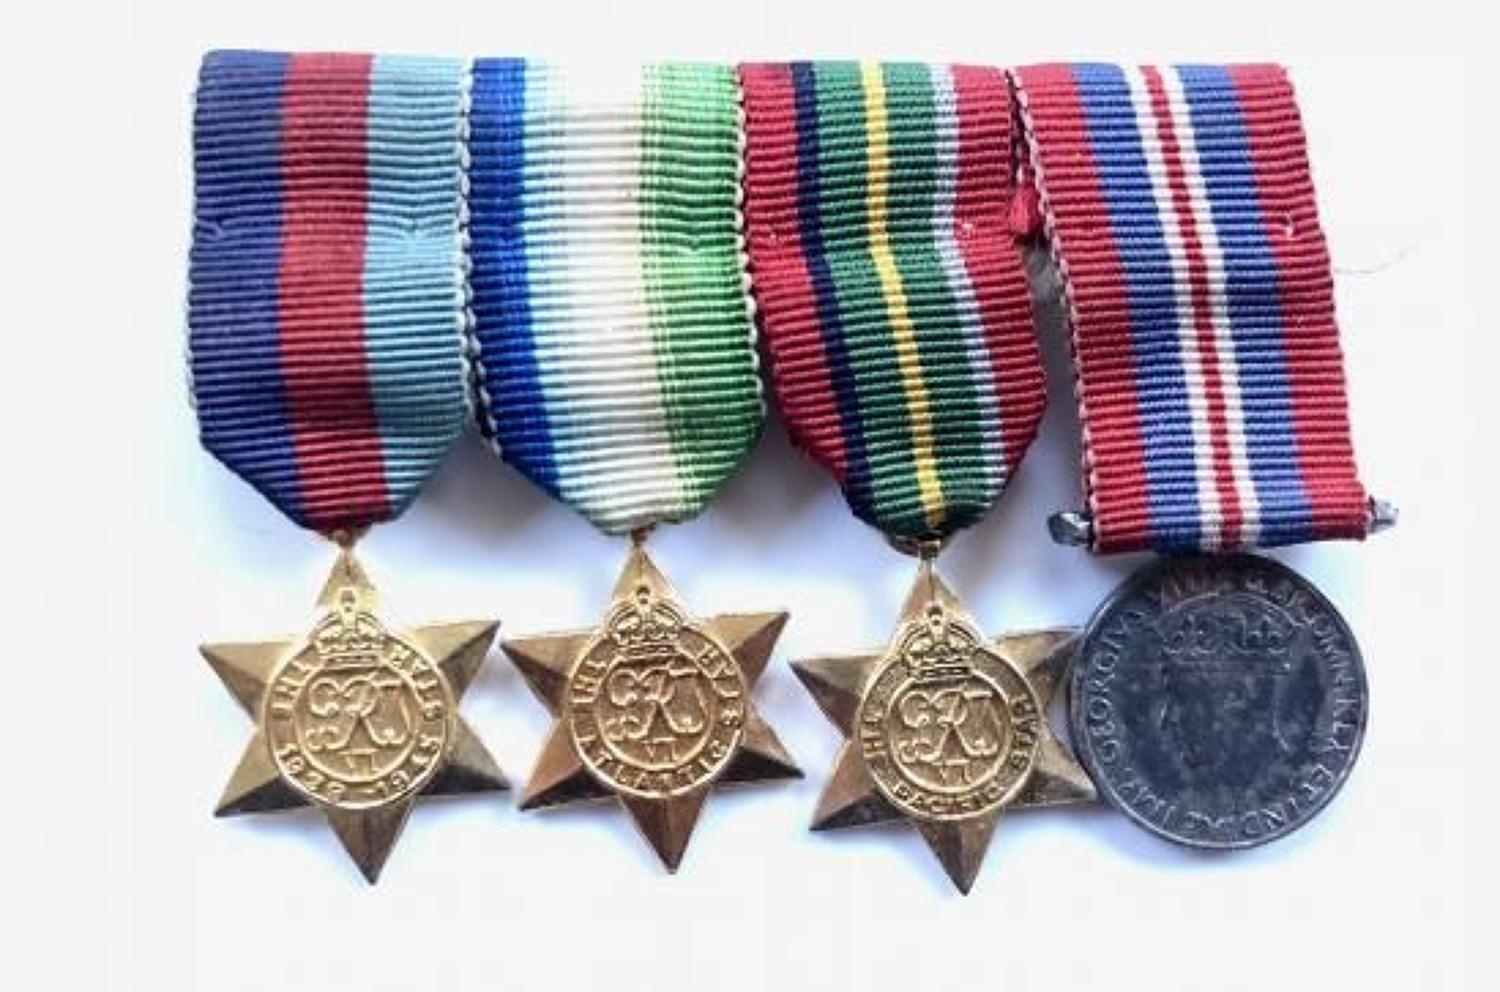 WW2 Campaign Set of Miniature Medals.